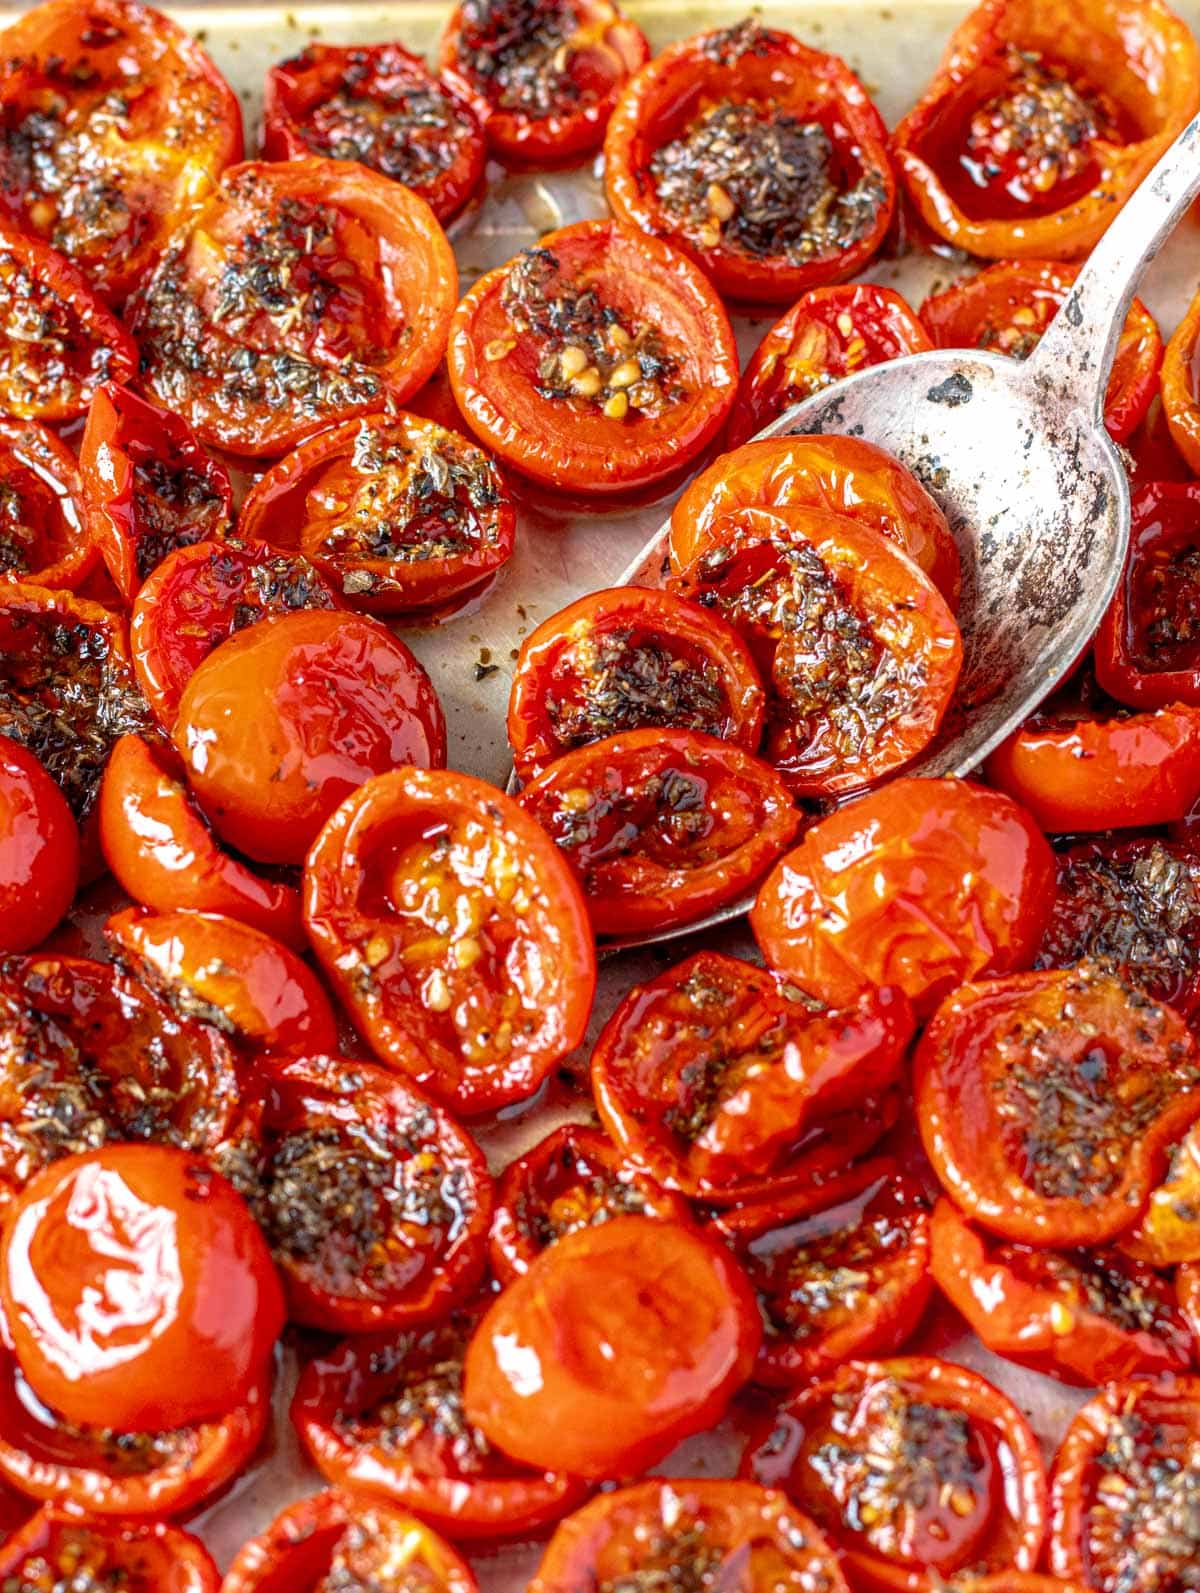 confit tomatoes after roasting with a silver spoon